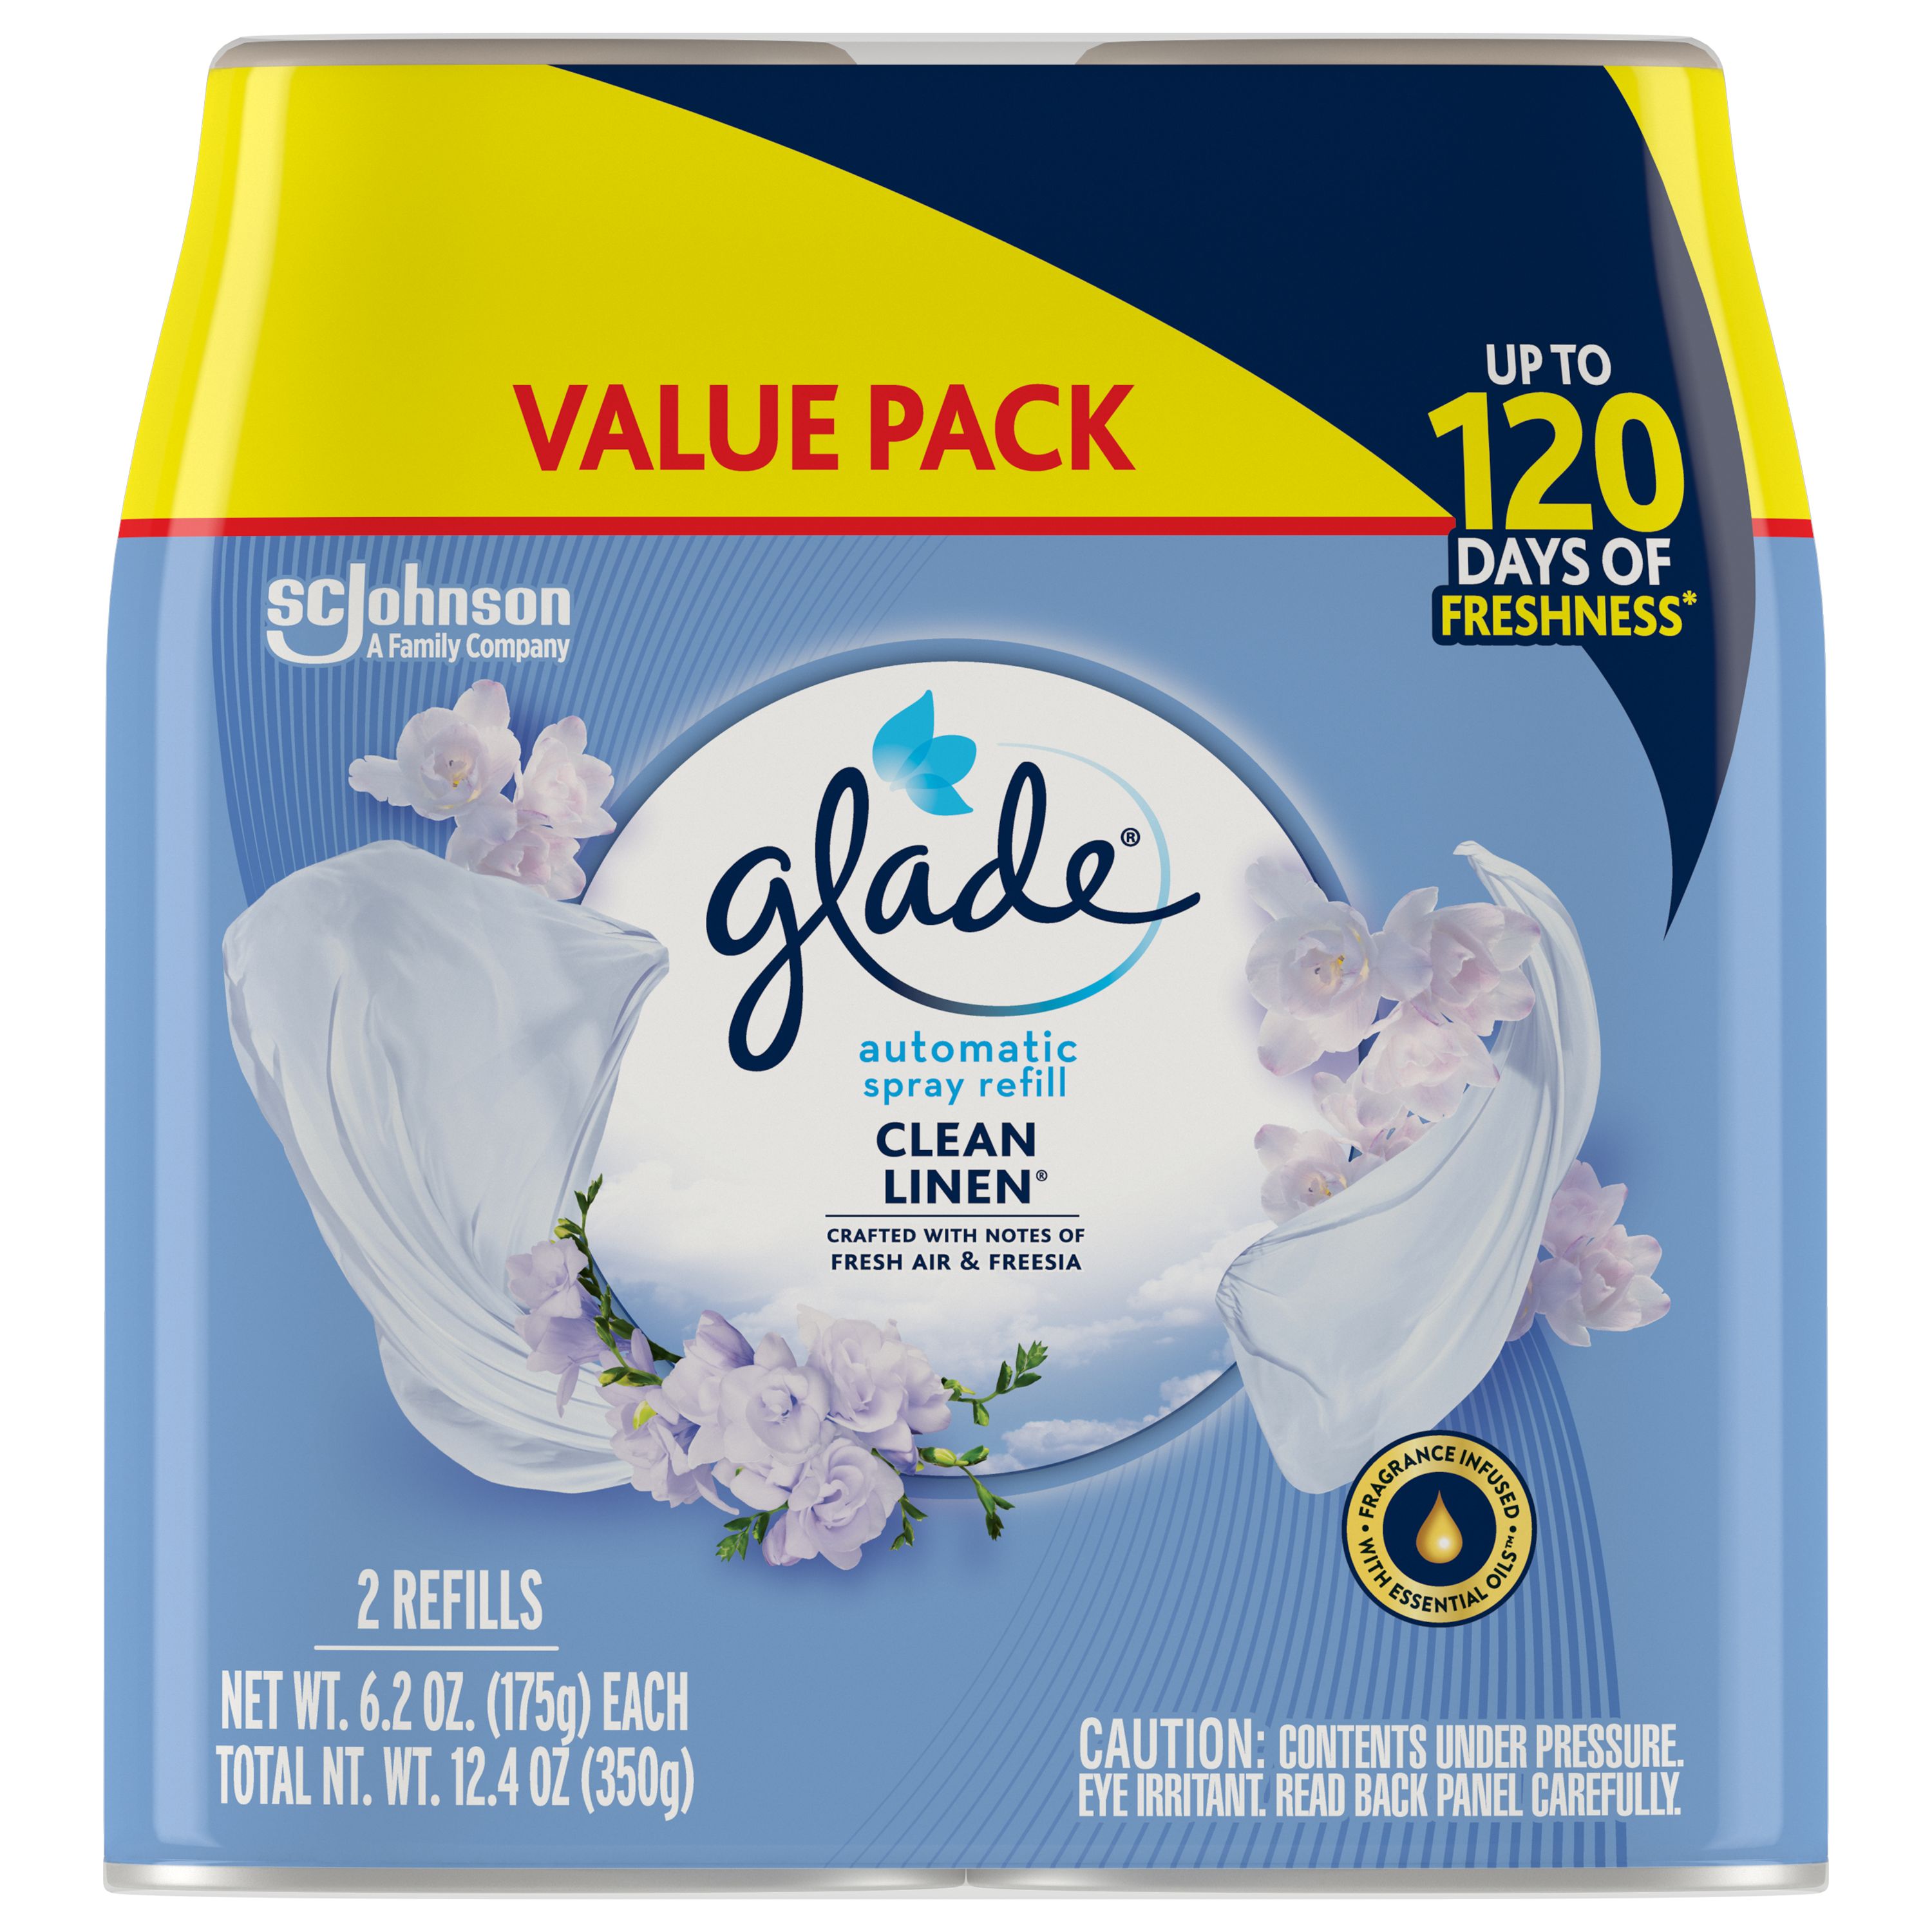 Glade Automatic Spray Refill, Clean Linen, Value Pack - 2 pack, 6.2 oz refills